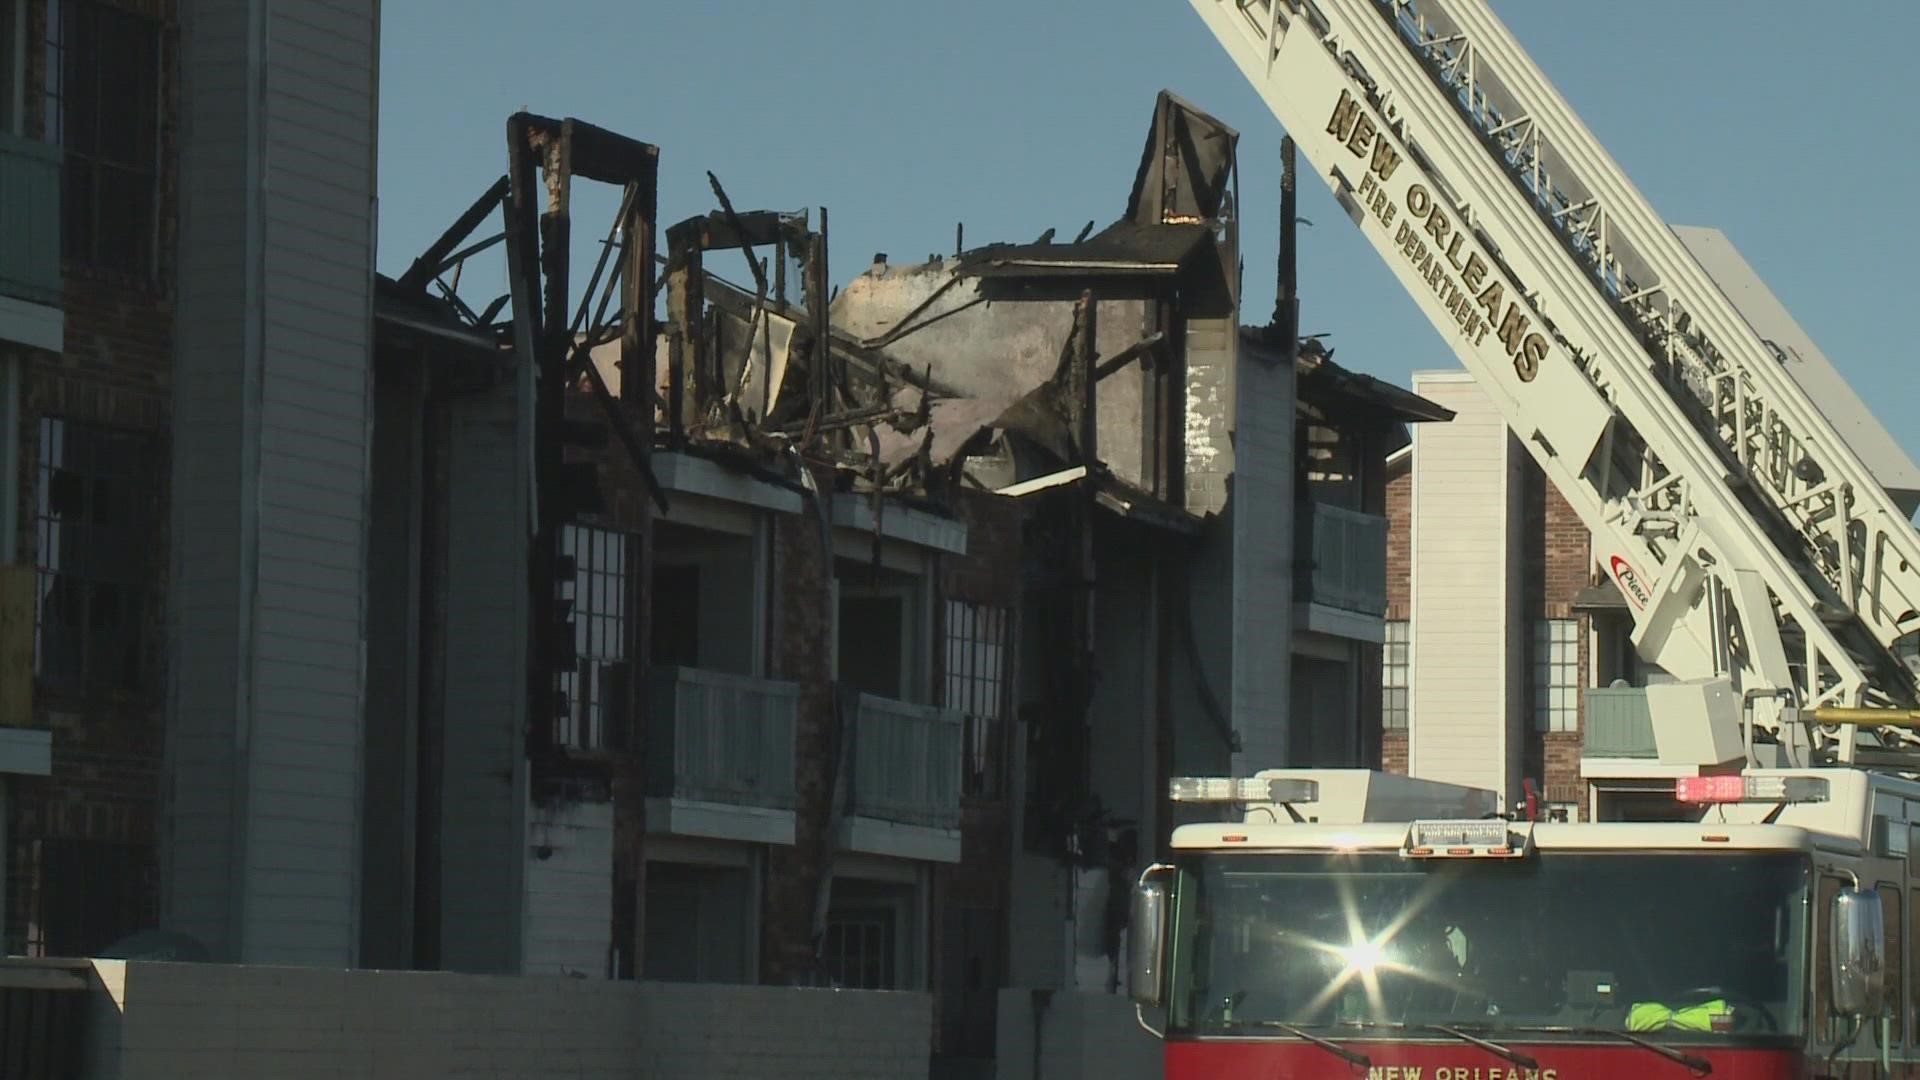 Families have been displaced after a 2-alarm fire at the Carmel Brook apartments Saturday.